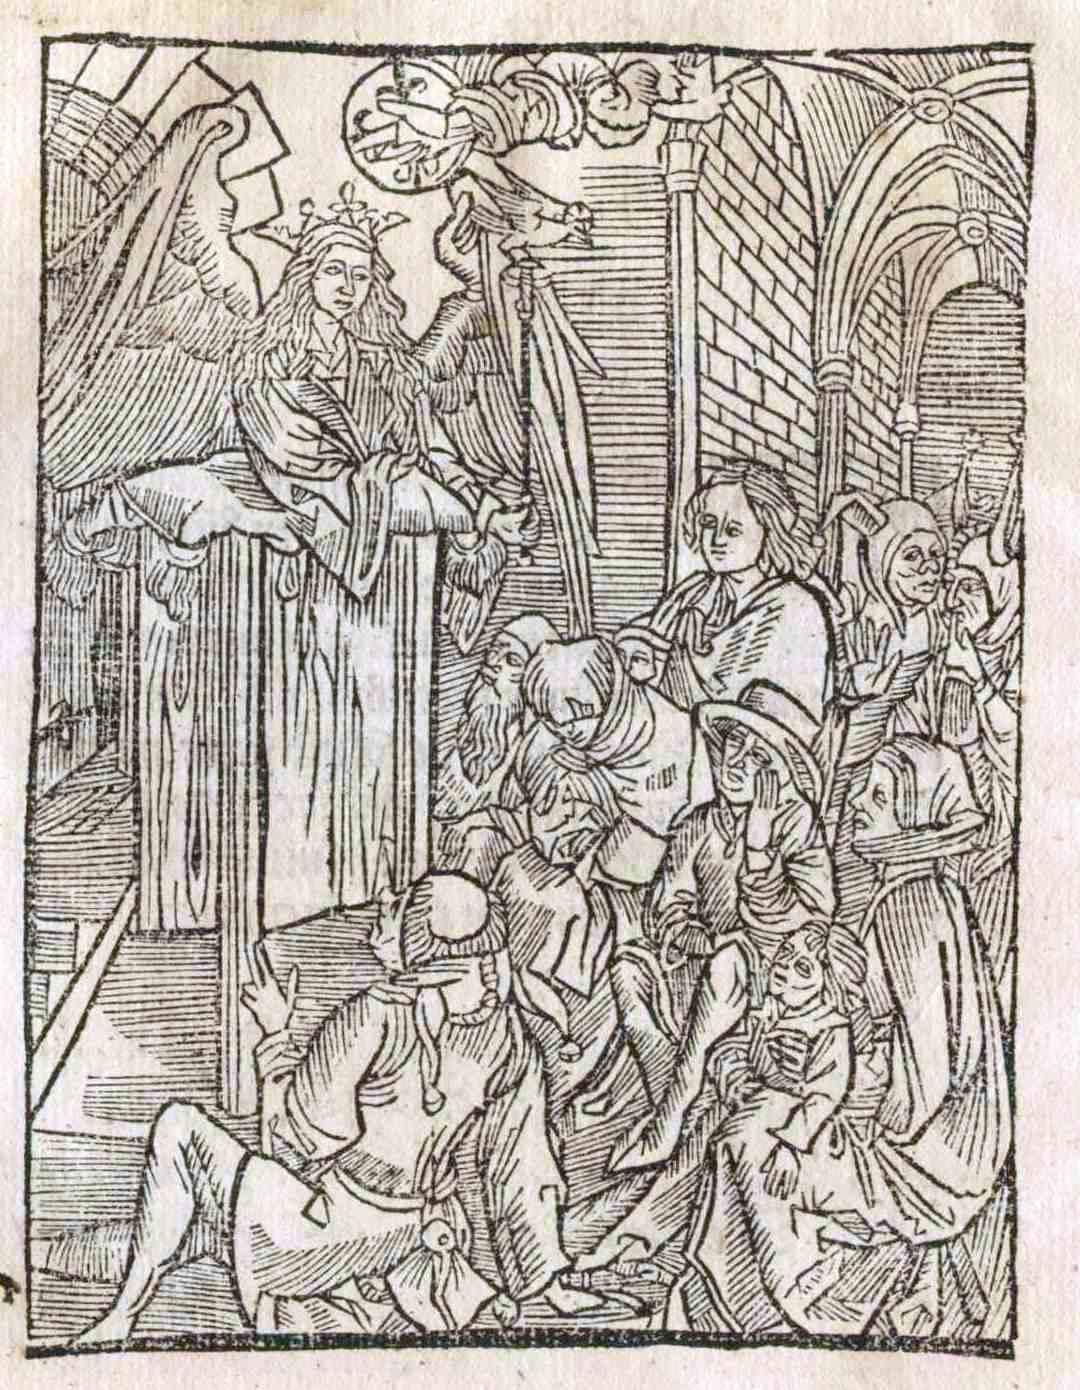 Full page woodcut illustration from the 1498 Dyalogus of Wisdom lecturing fools and the ignorant.